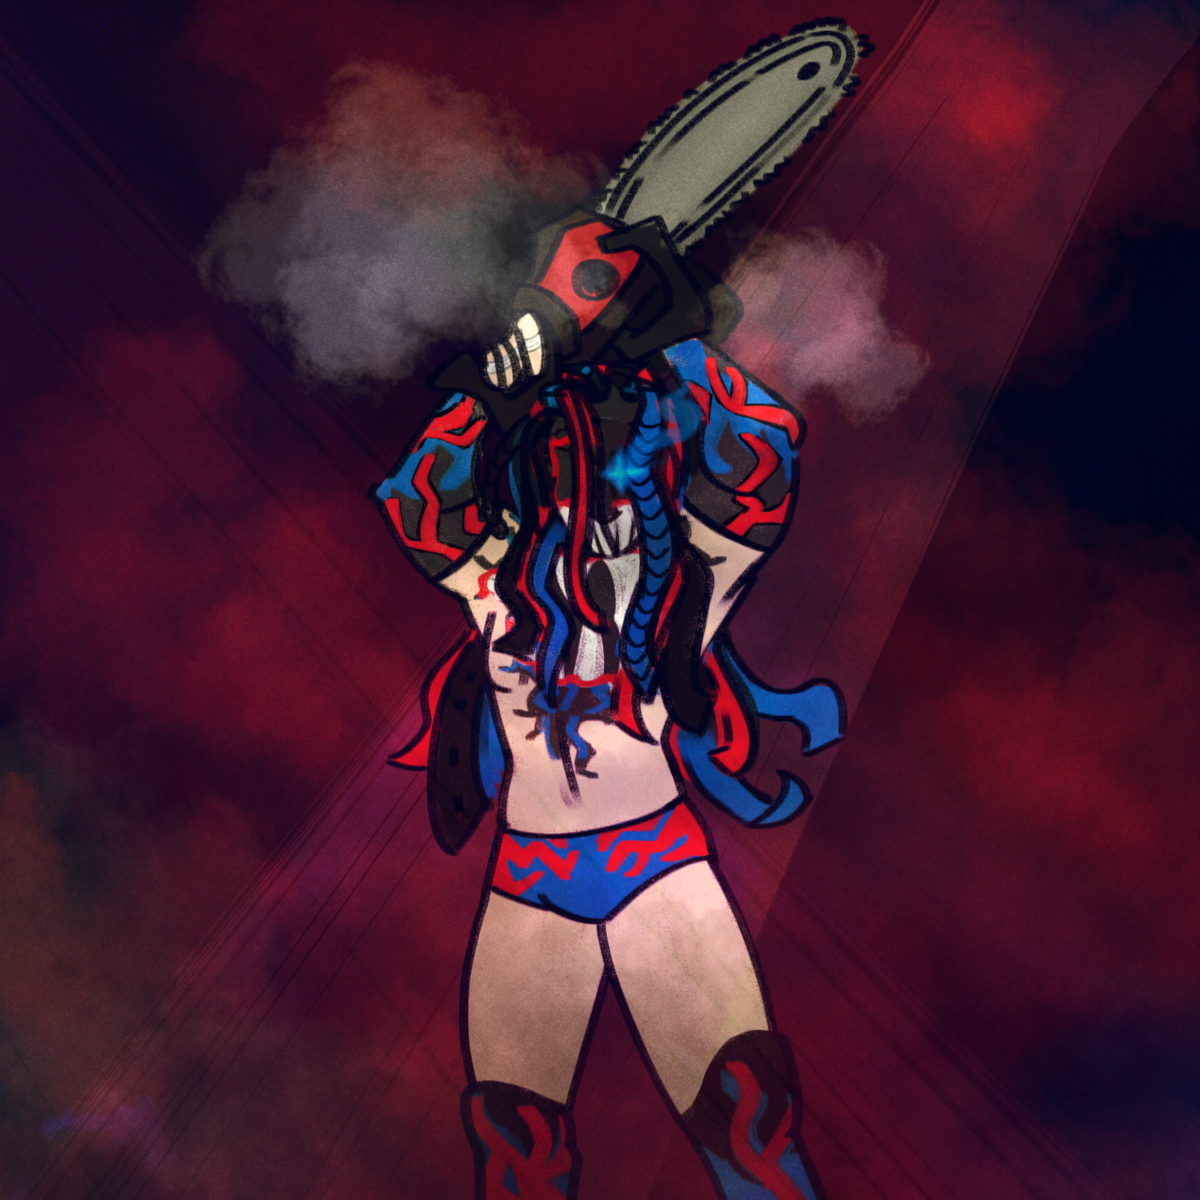 a drawing of Demon king Finn Balor. He is surrounded by black and red fog, and holds a smoking chainsaw above his head. Blue, red, and black ribbons cover his face, and a blue shimmer pokes out from between them, representing his right eye